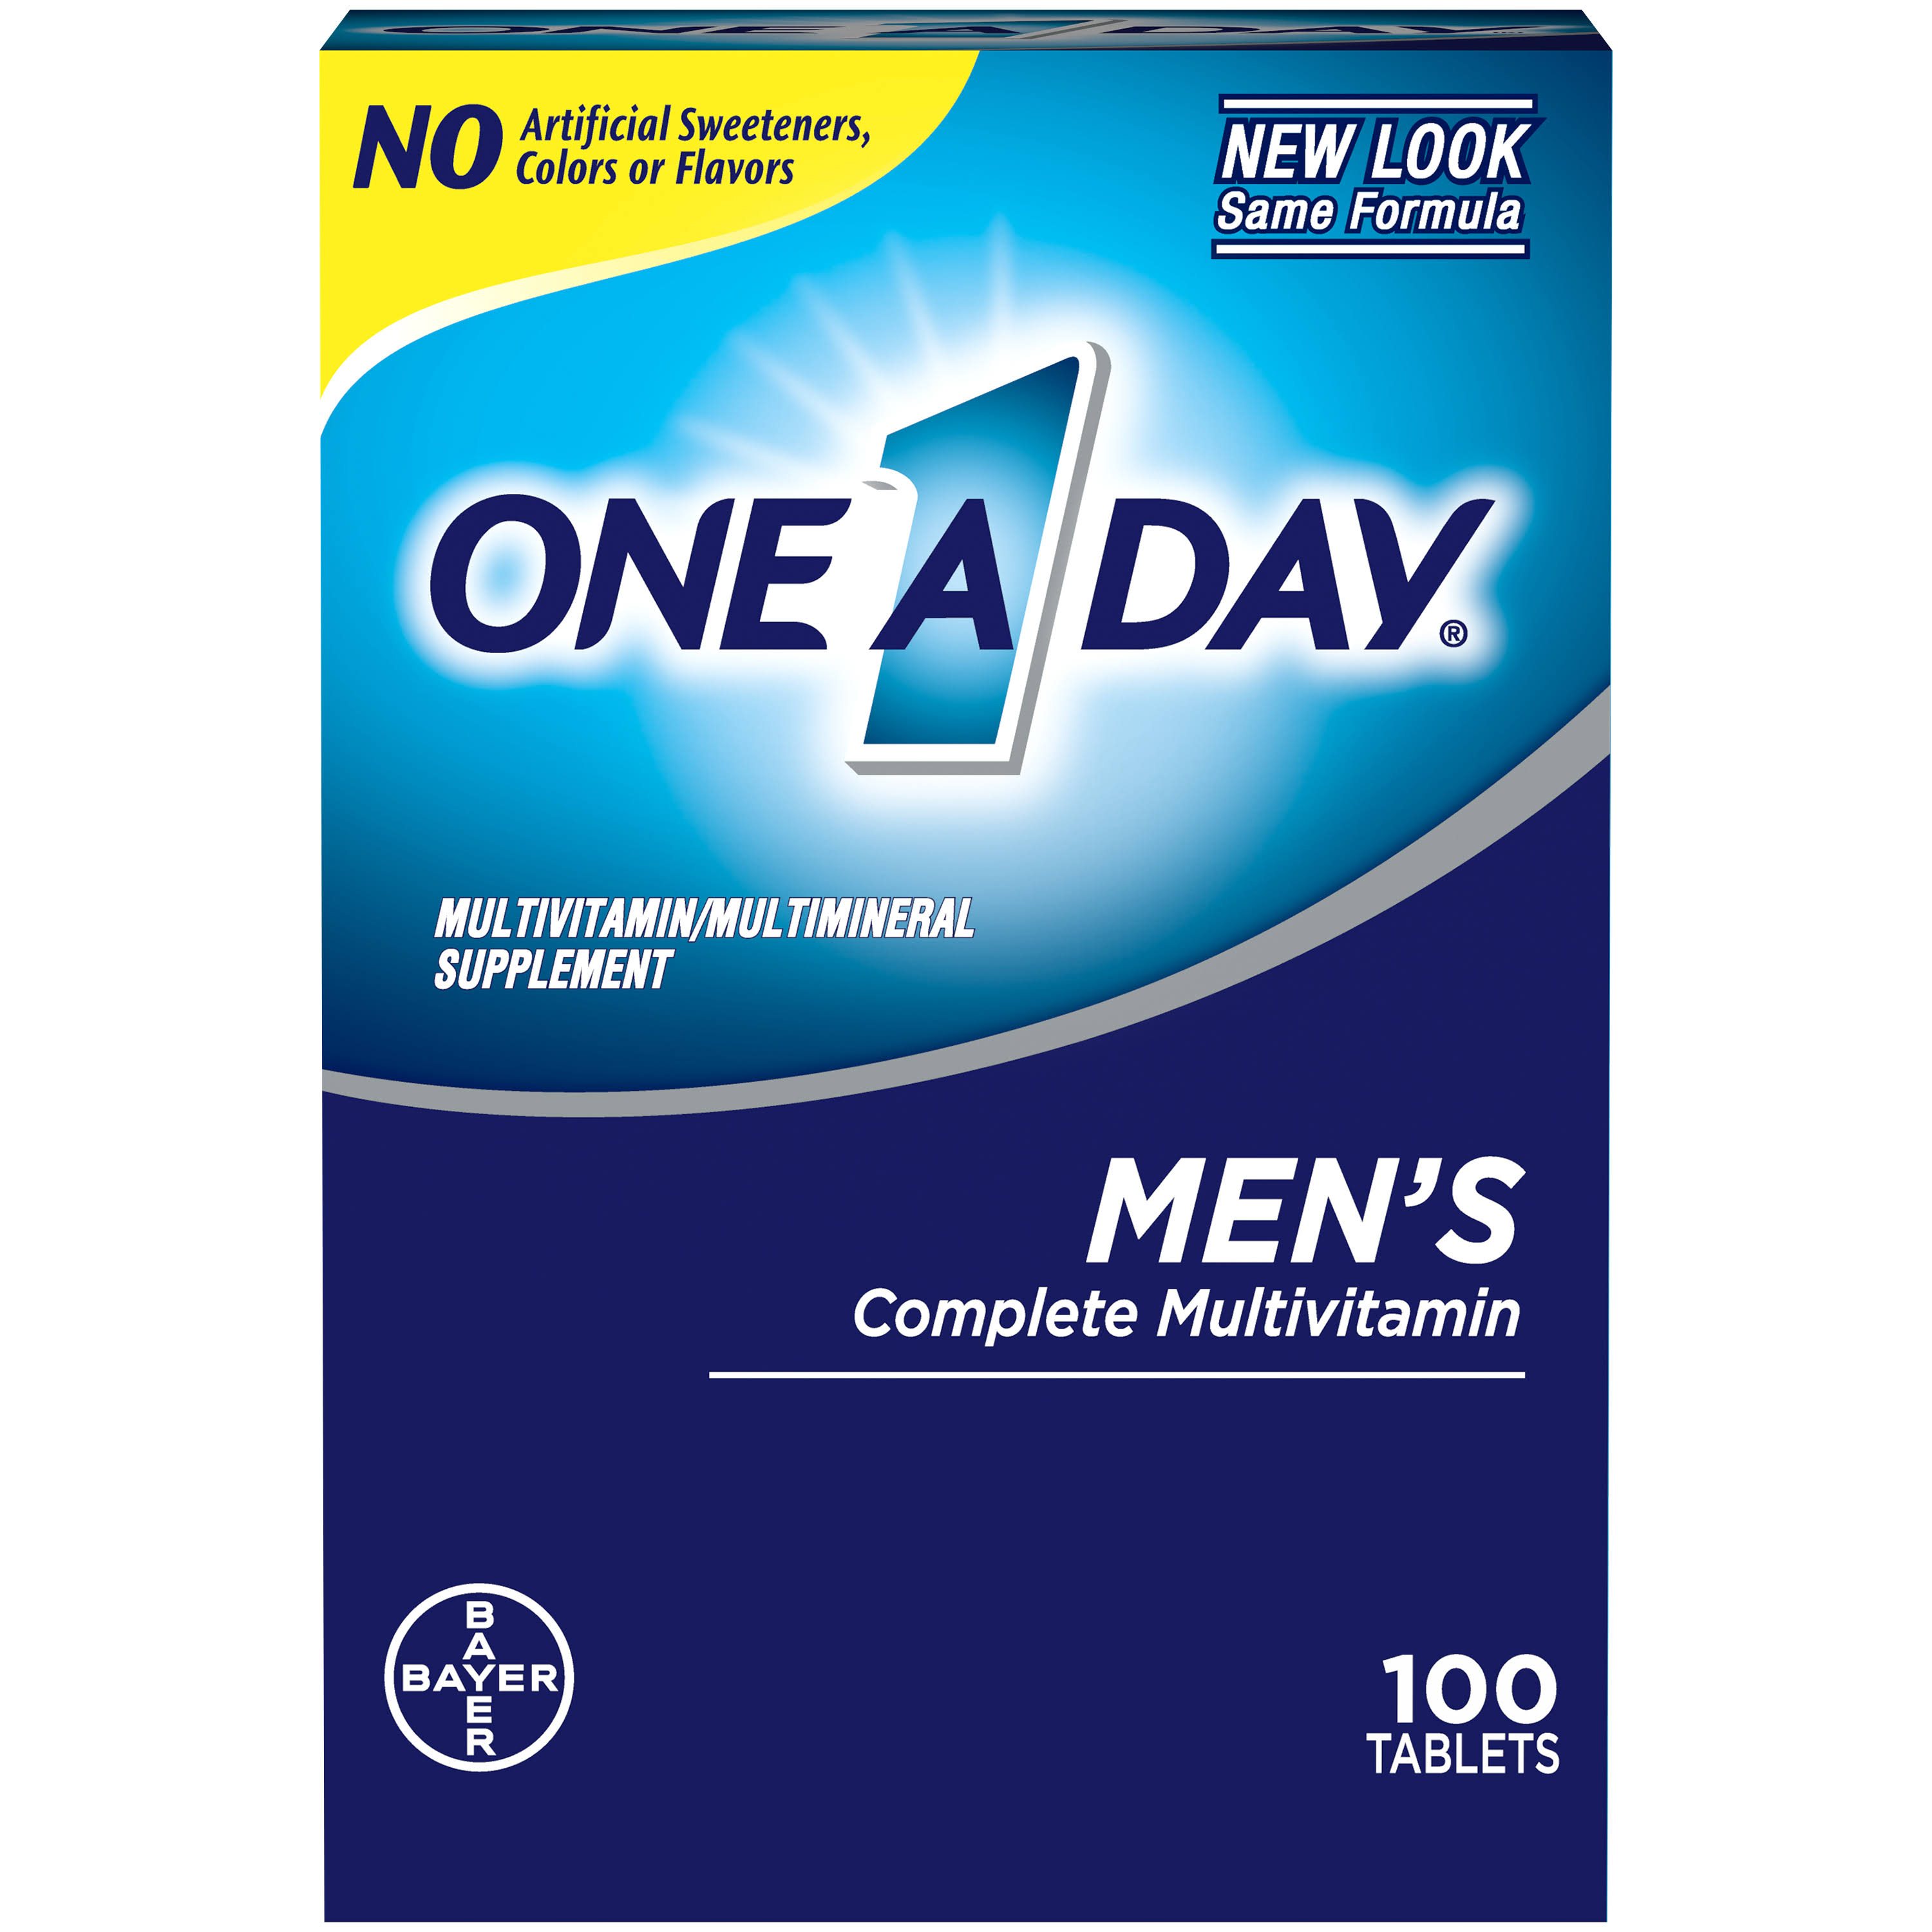 One-A-Day Men's Complete Multivitamin -- 100 Tablets